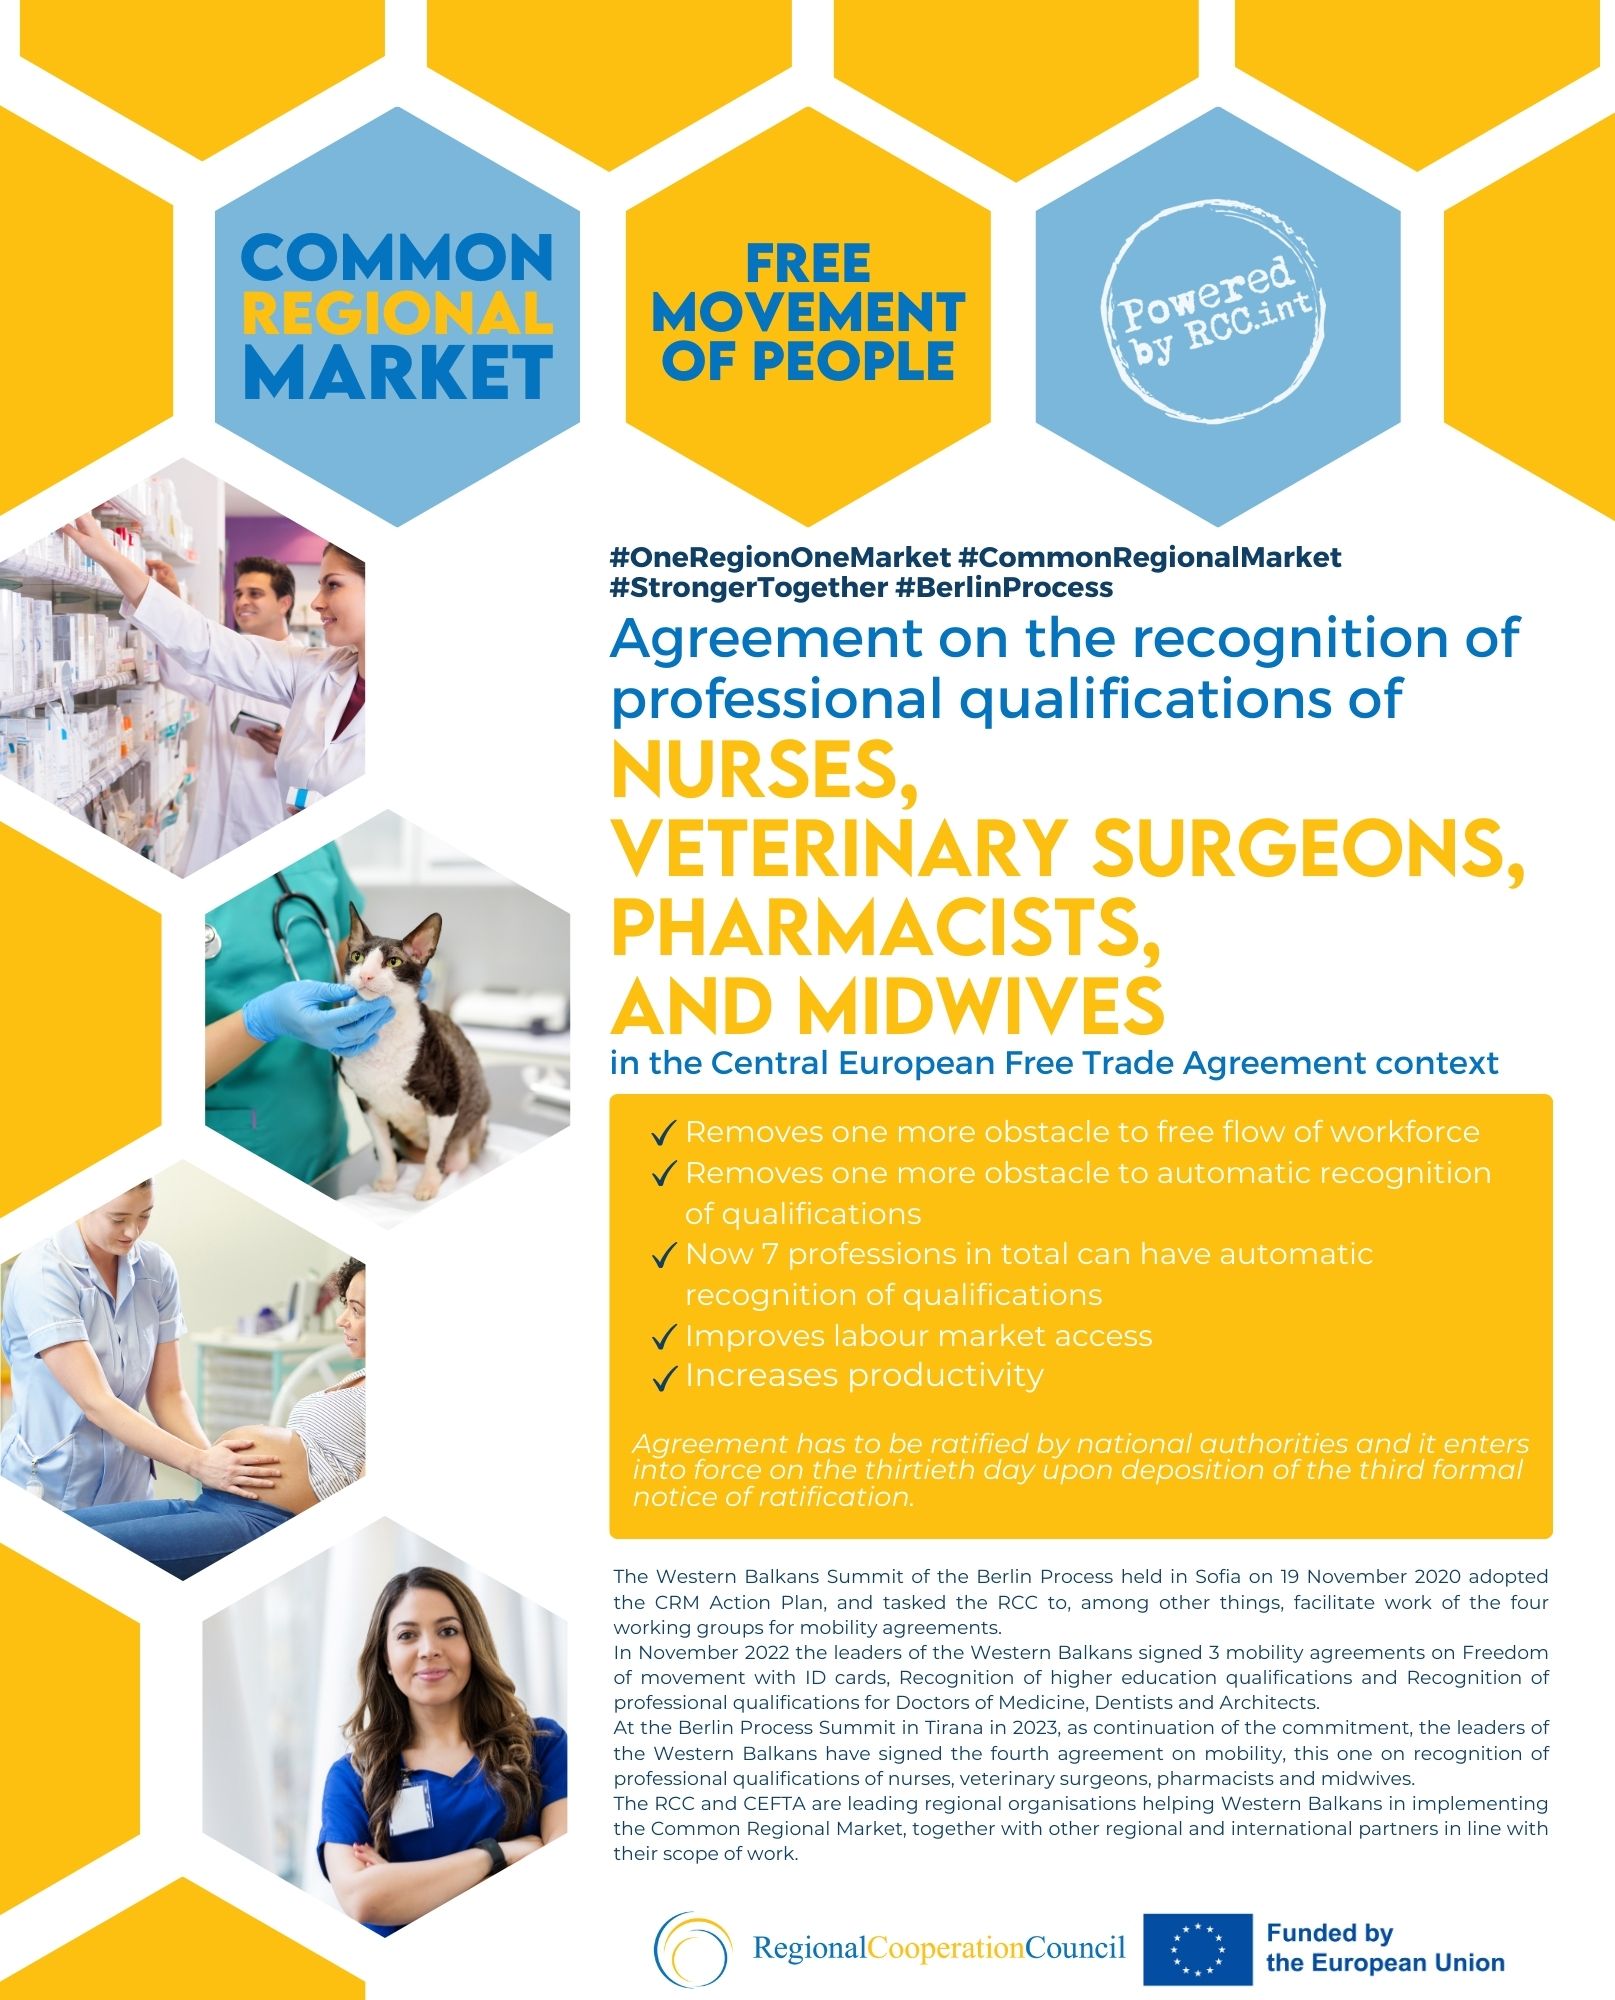 Fact sheet: Agreement on the Recognition of Professional Qualifications of Nurses, Veterinary Surgeons, Pharmacists, and Midwives